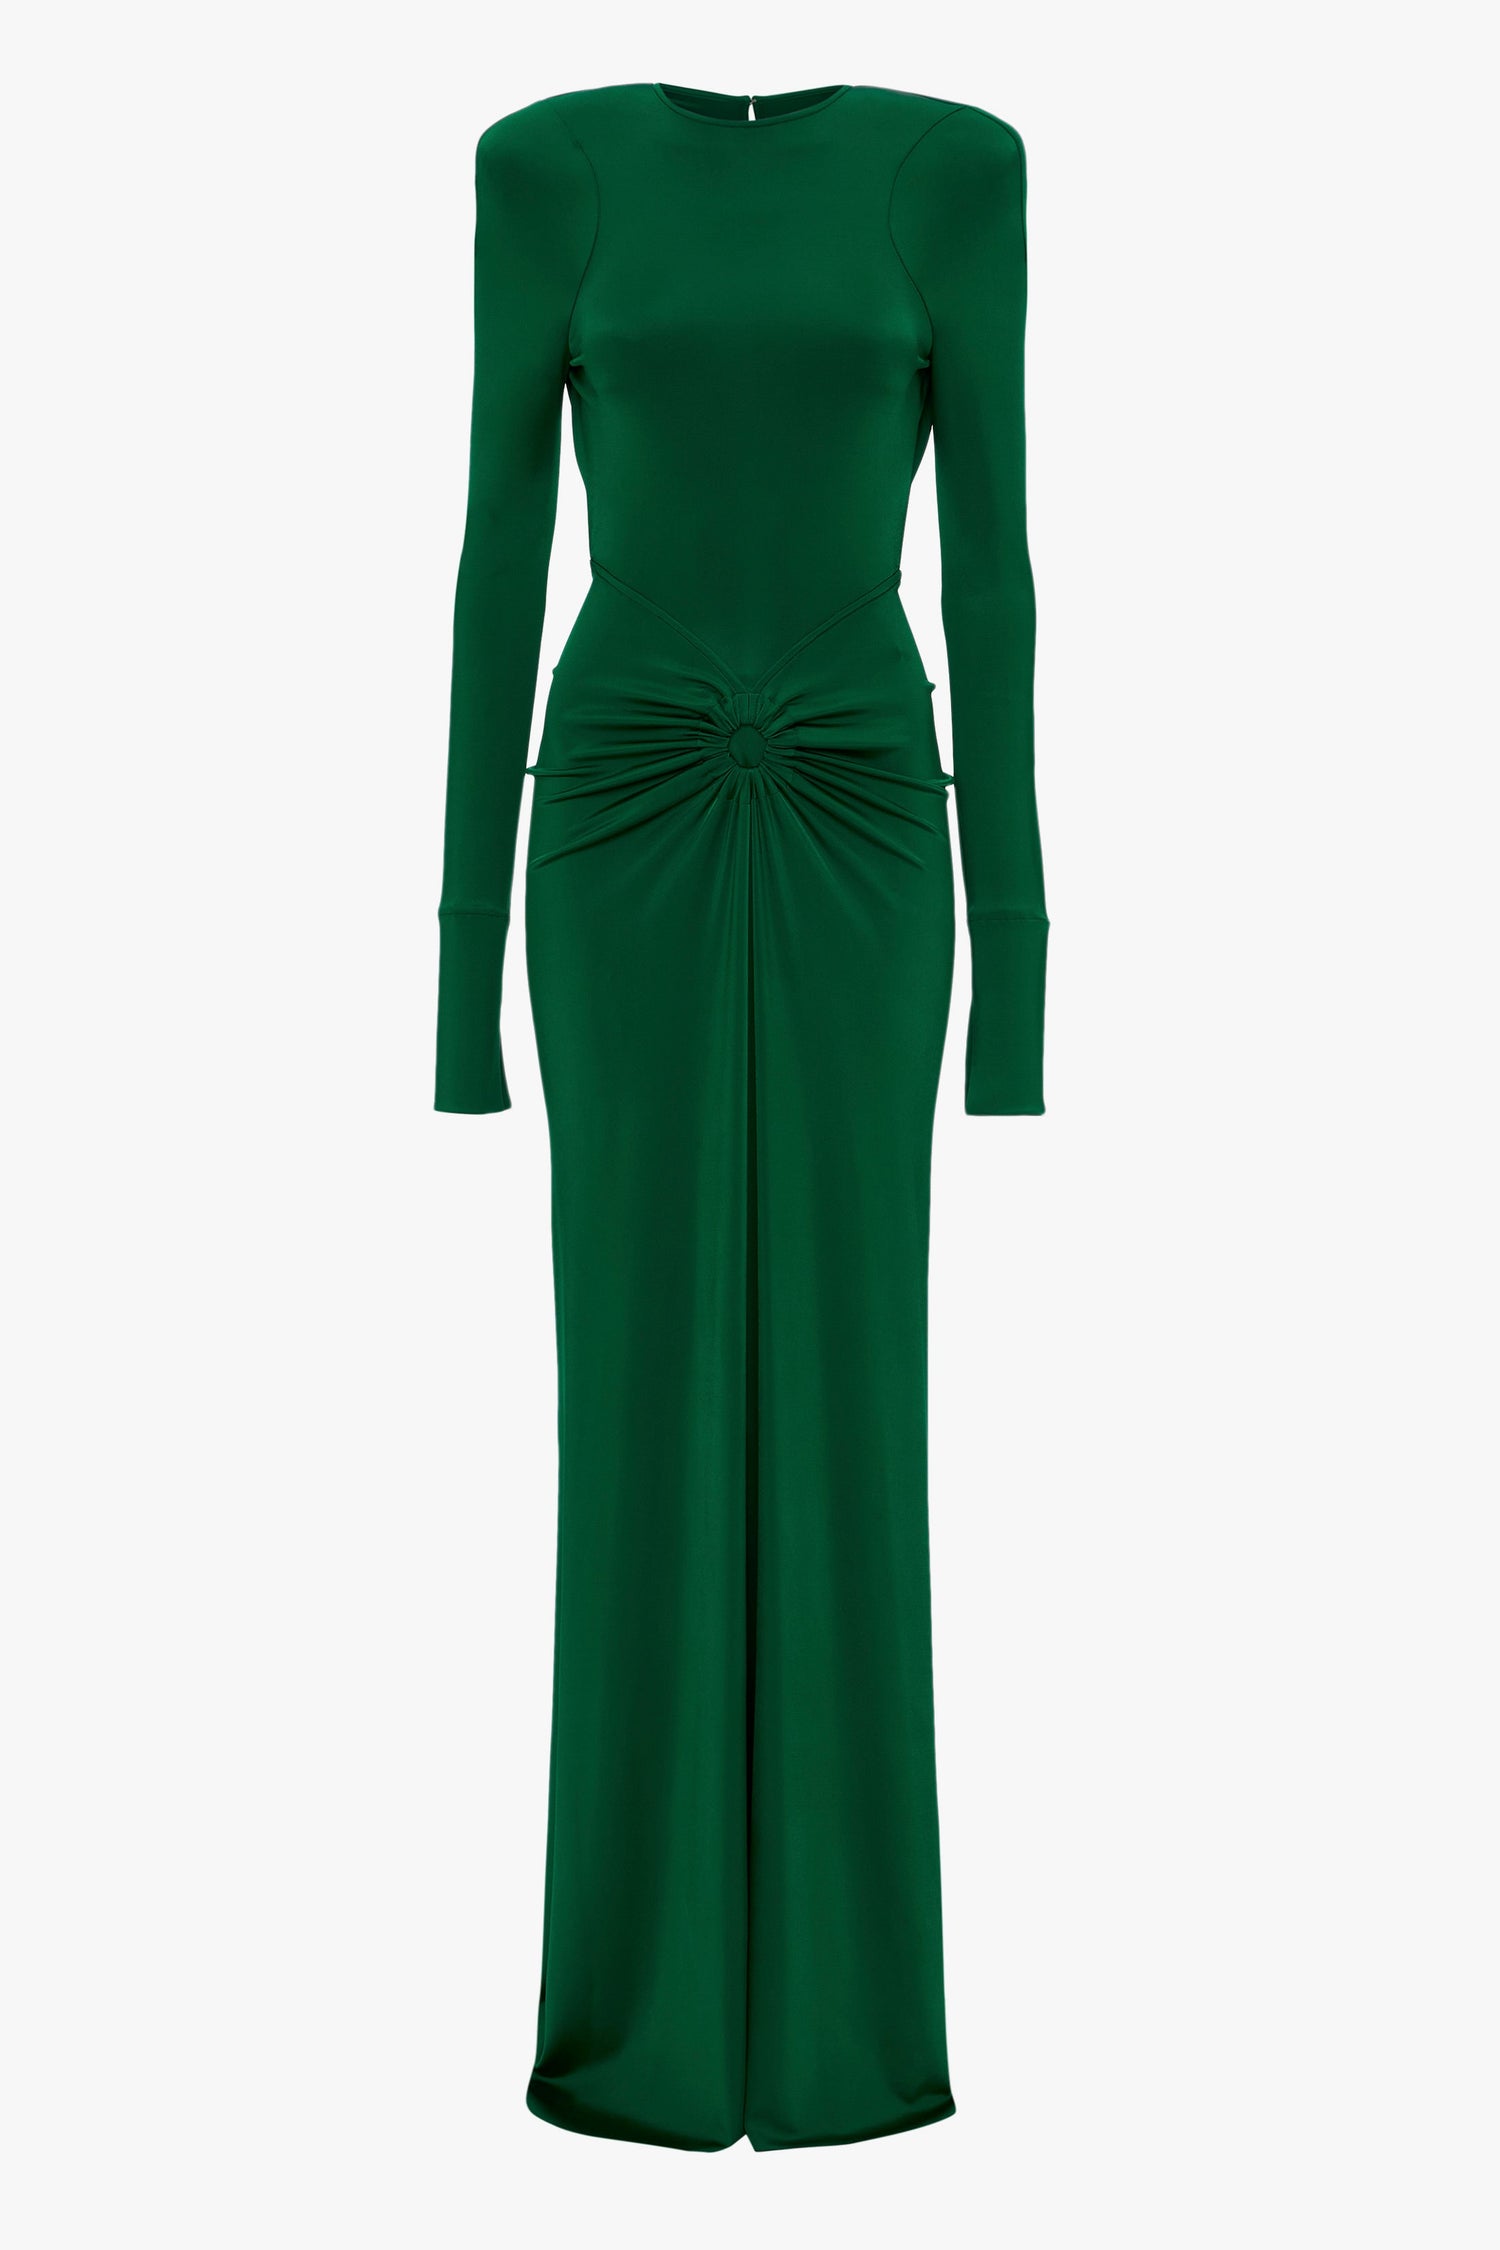 A long-sleeved, floor-length, emerald green Circle Detail Open Back Gown In Emerald by Victoria Beckham with shoulder pads, a body-sculpting jersey fabric, cinched waist, and central knotted detail.